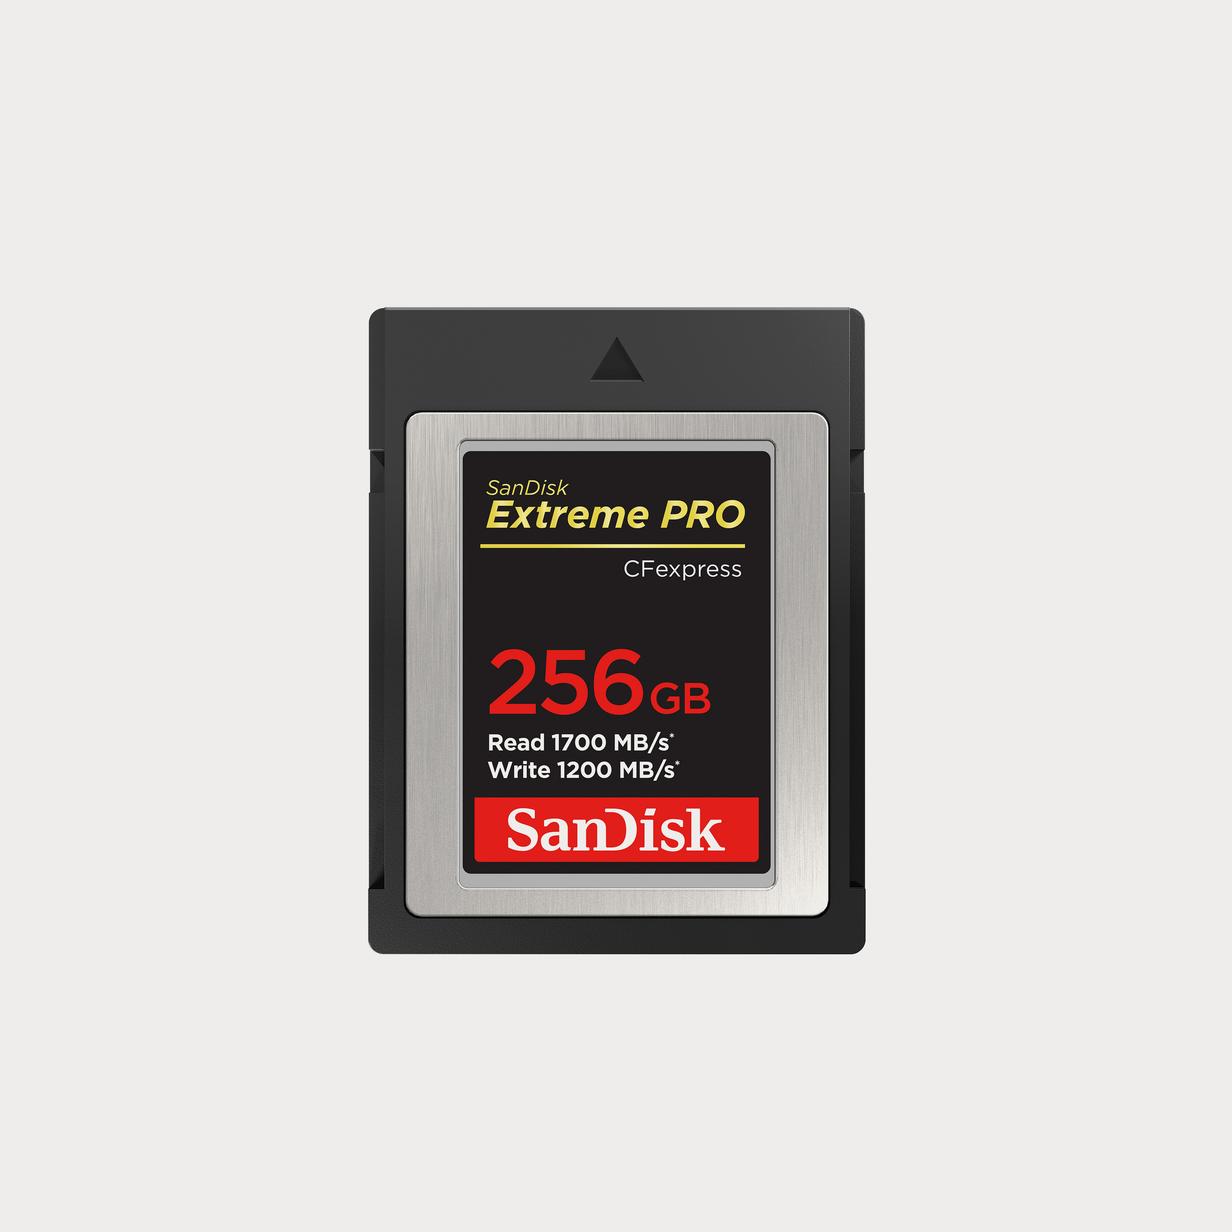 Moment sandisk SDCFXPS 256 G A46 ANCNN Extreme Pro C Fexpress Card 256 GB 01